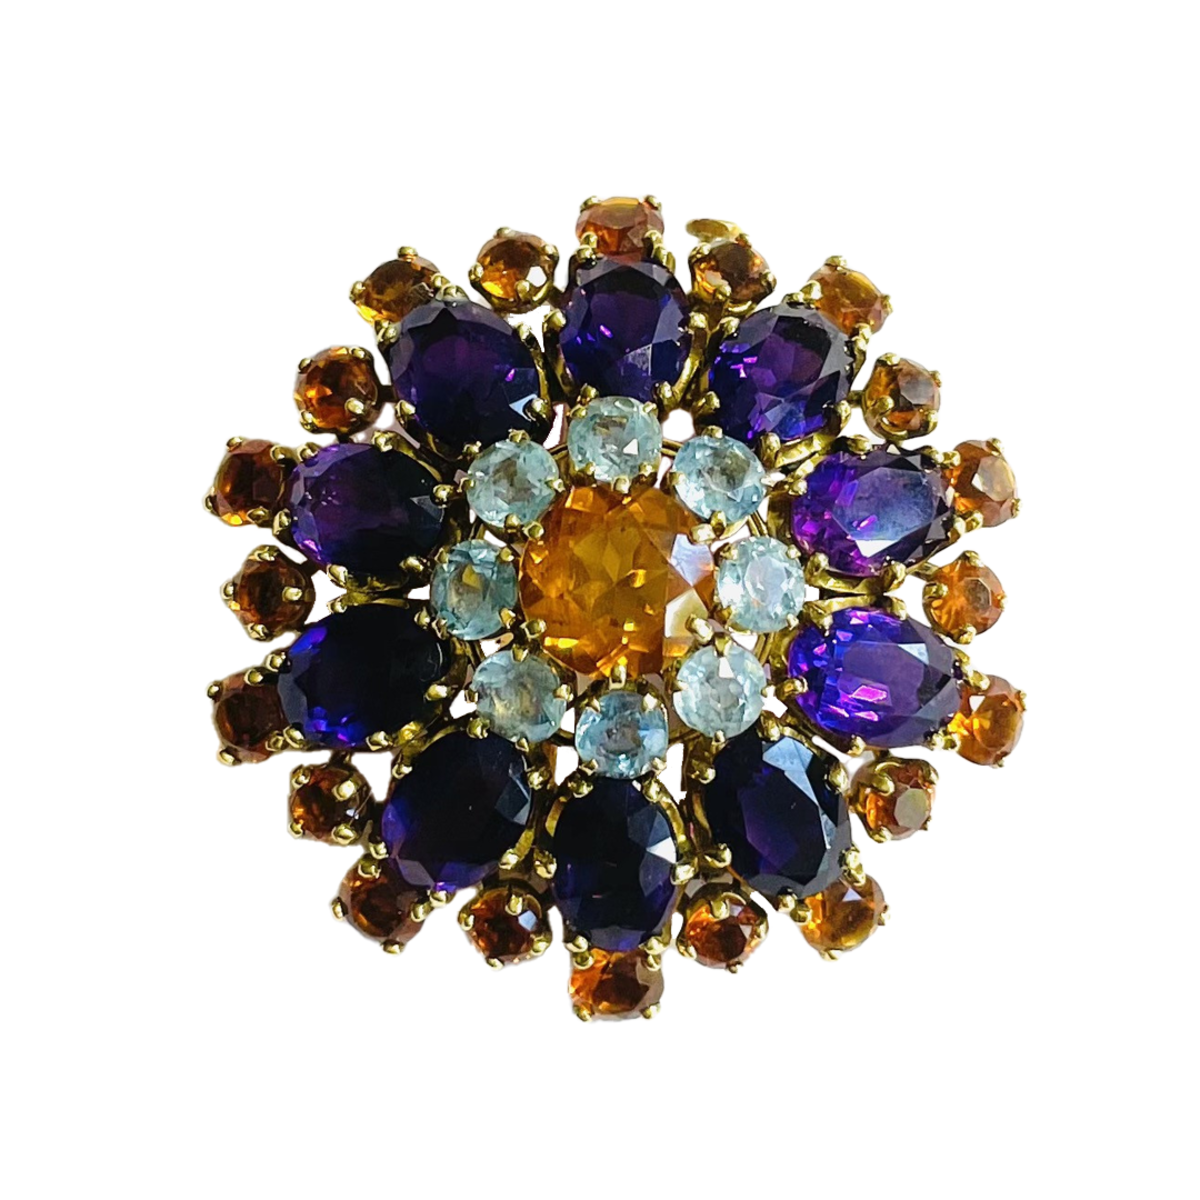 Mellerio French 1960s 18KT Yellow Gold Amethyst, Aquamarine & Citrine Brooch front